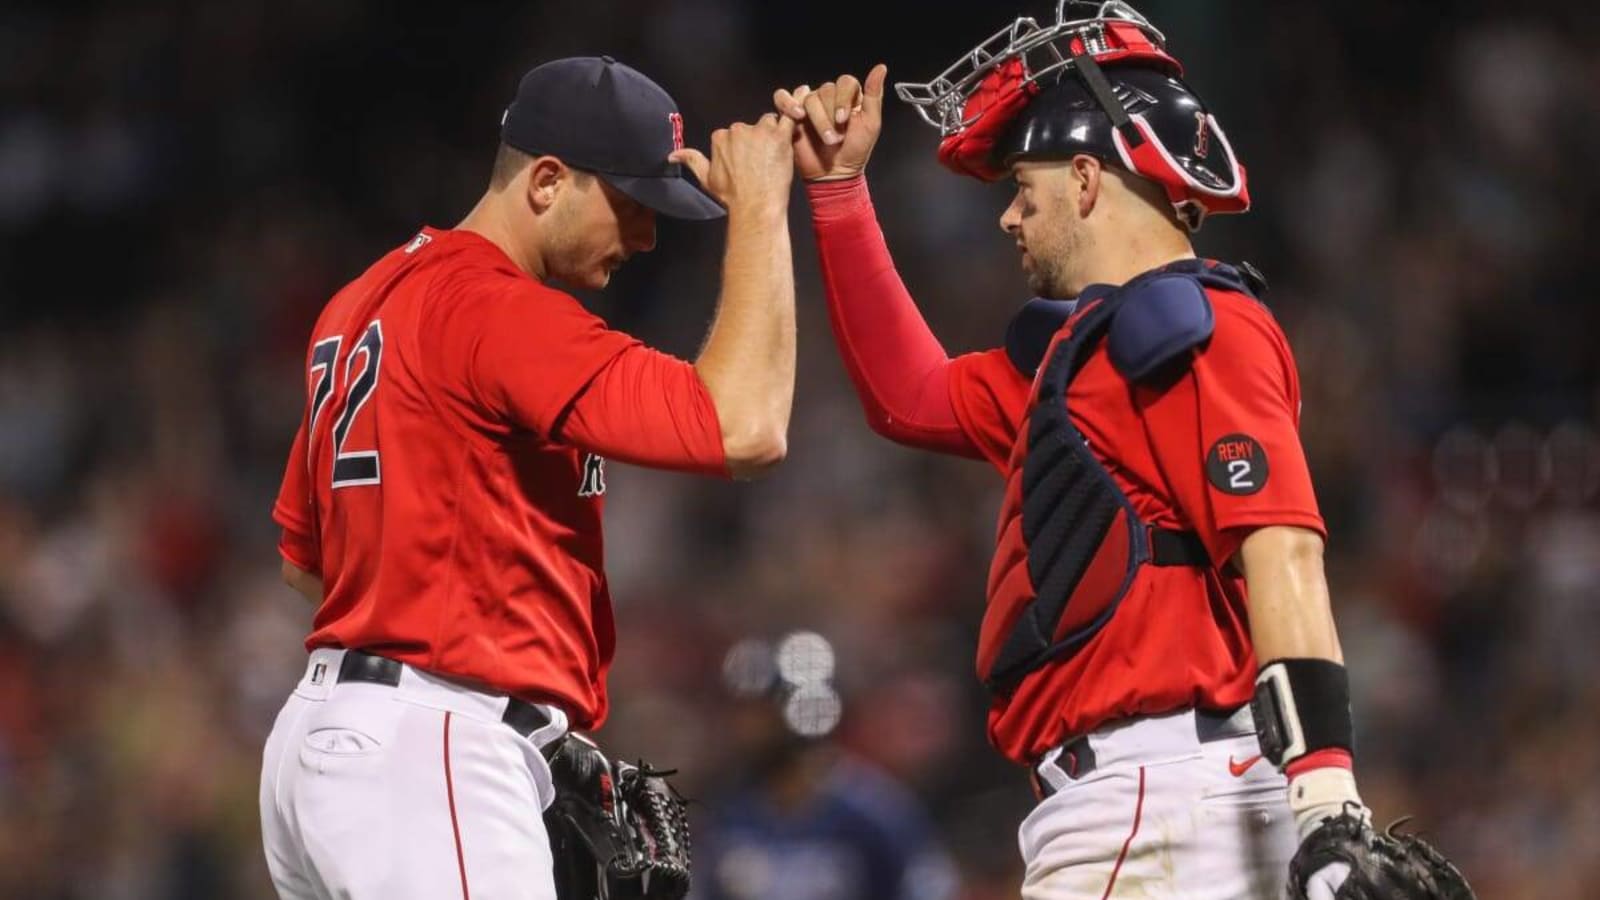 Ex-Red Sox Catcher Reportedly Available; Should Boston Consider Reunion To Bolster Depth?